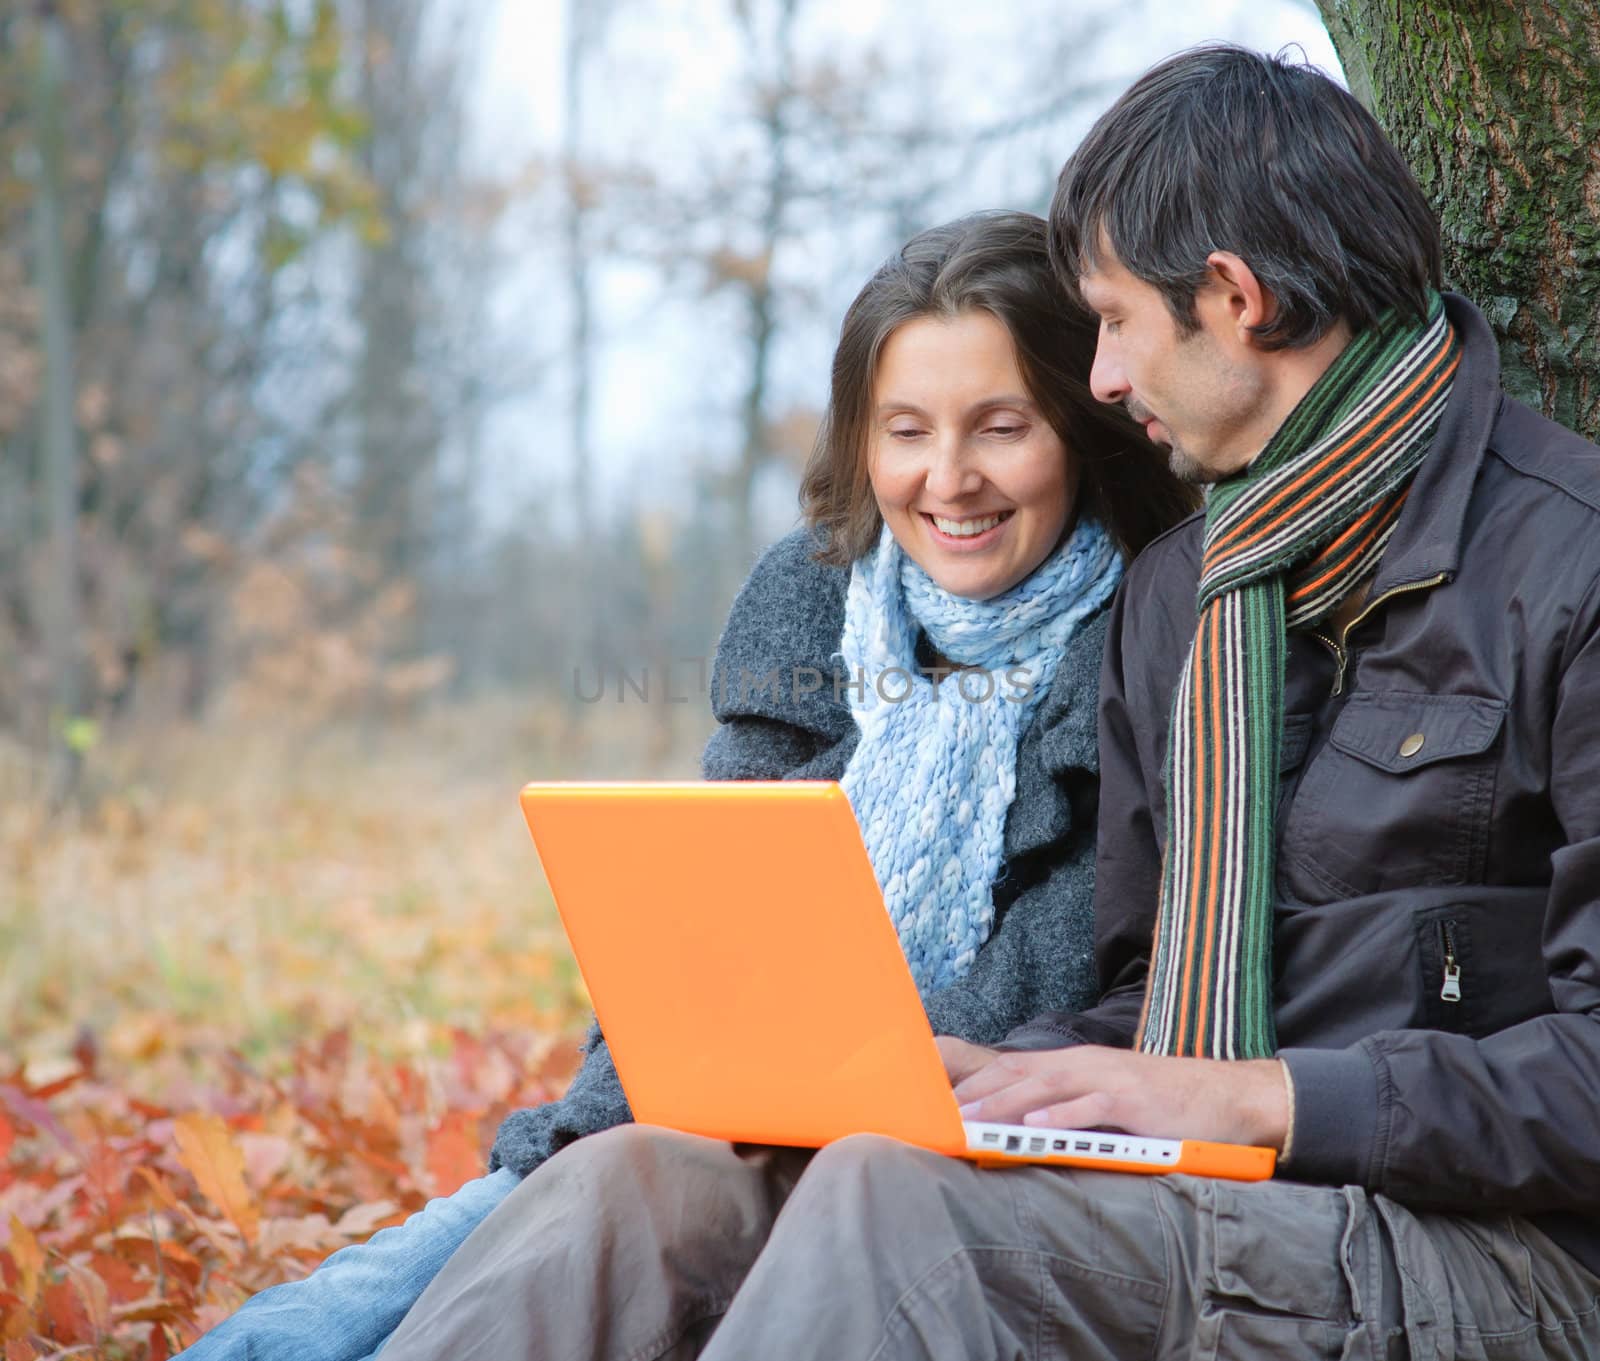 Romantic mature couple sitting with laptop in the autumn park.